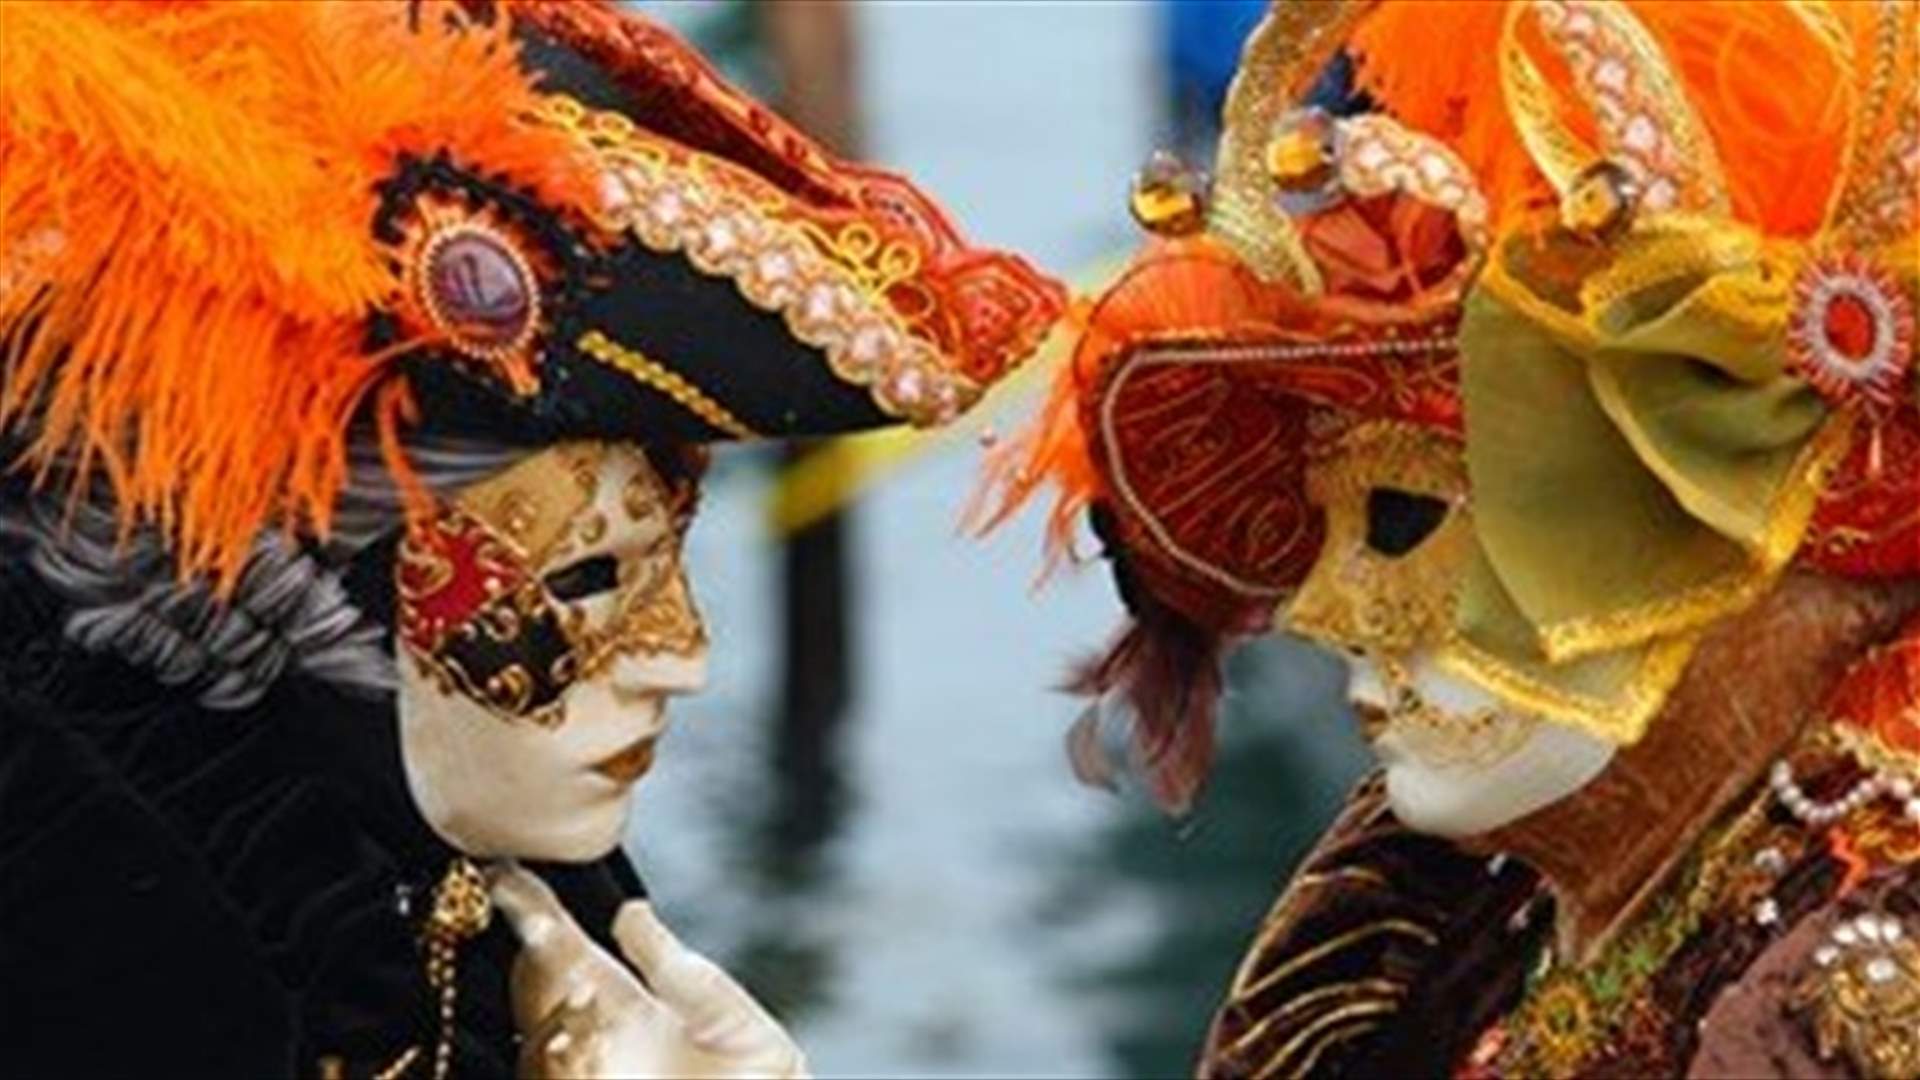 Venice Carnival to be halted due to coronavirus outbreak